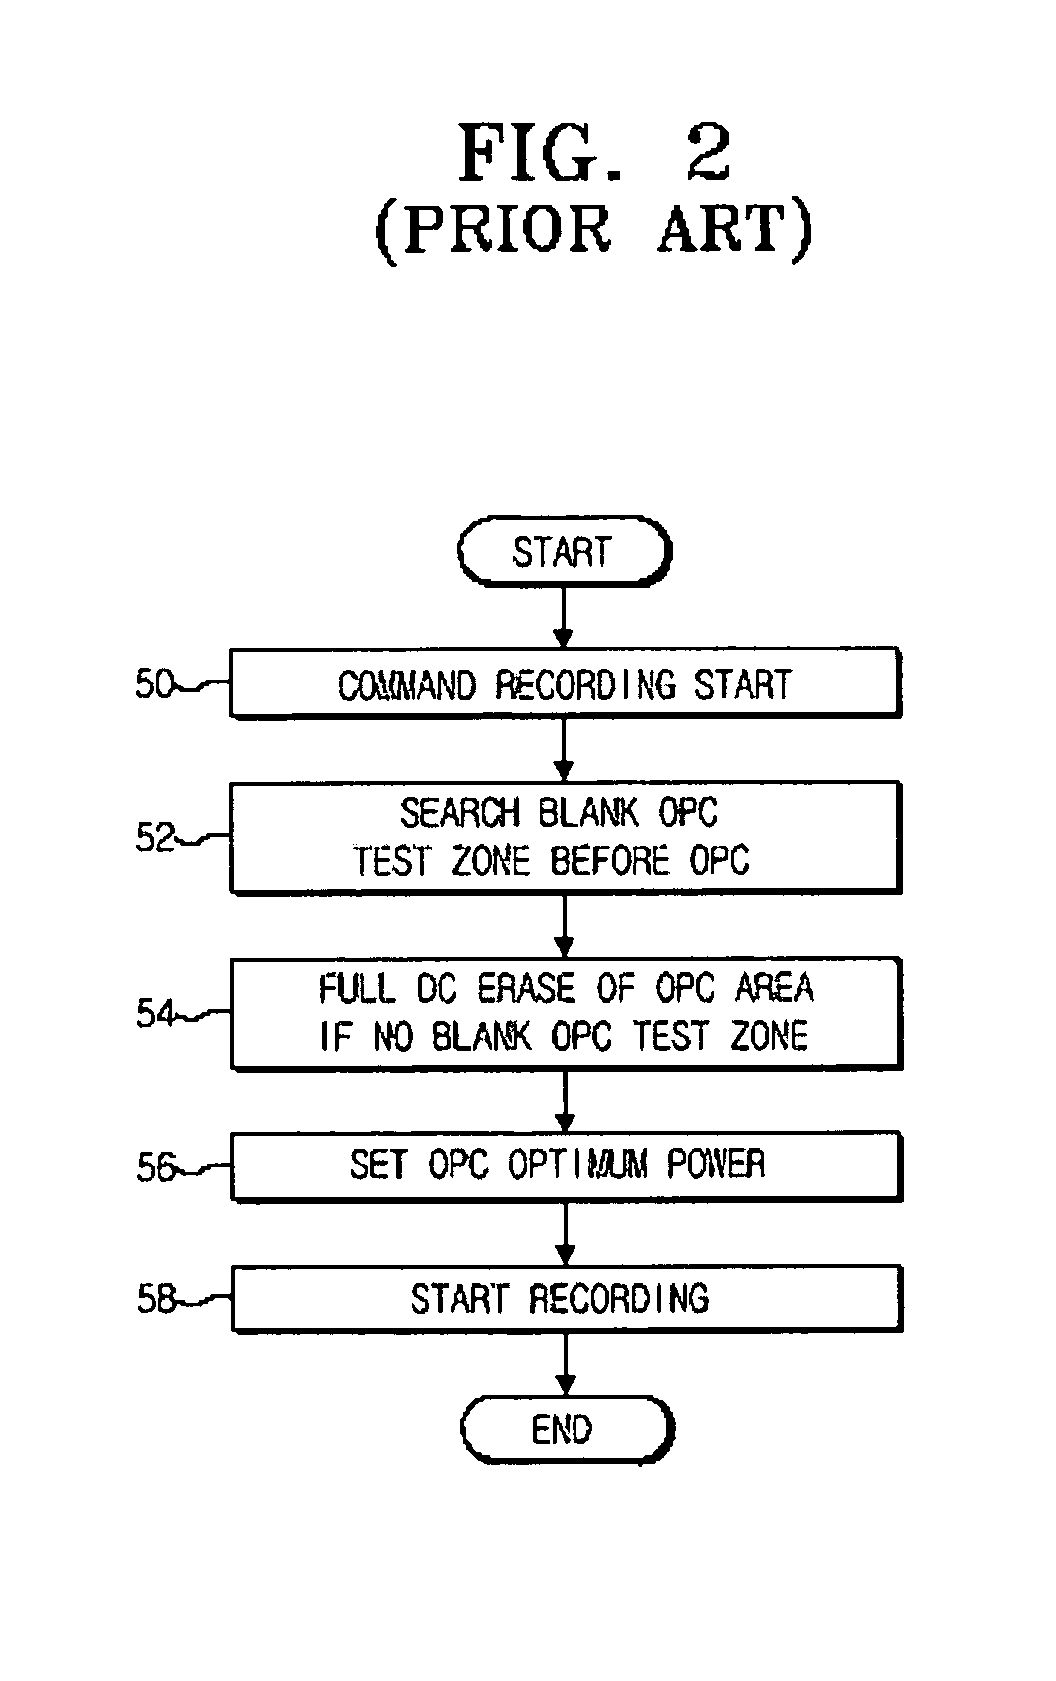 Apparatus and method for improving deviation of optimum power calibration (OPC)